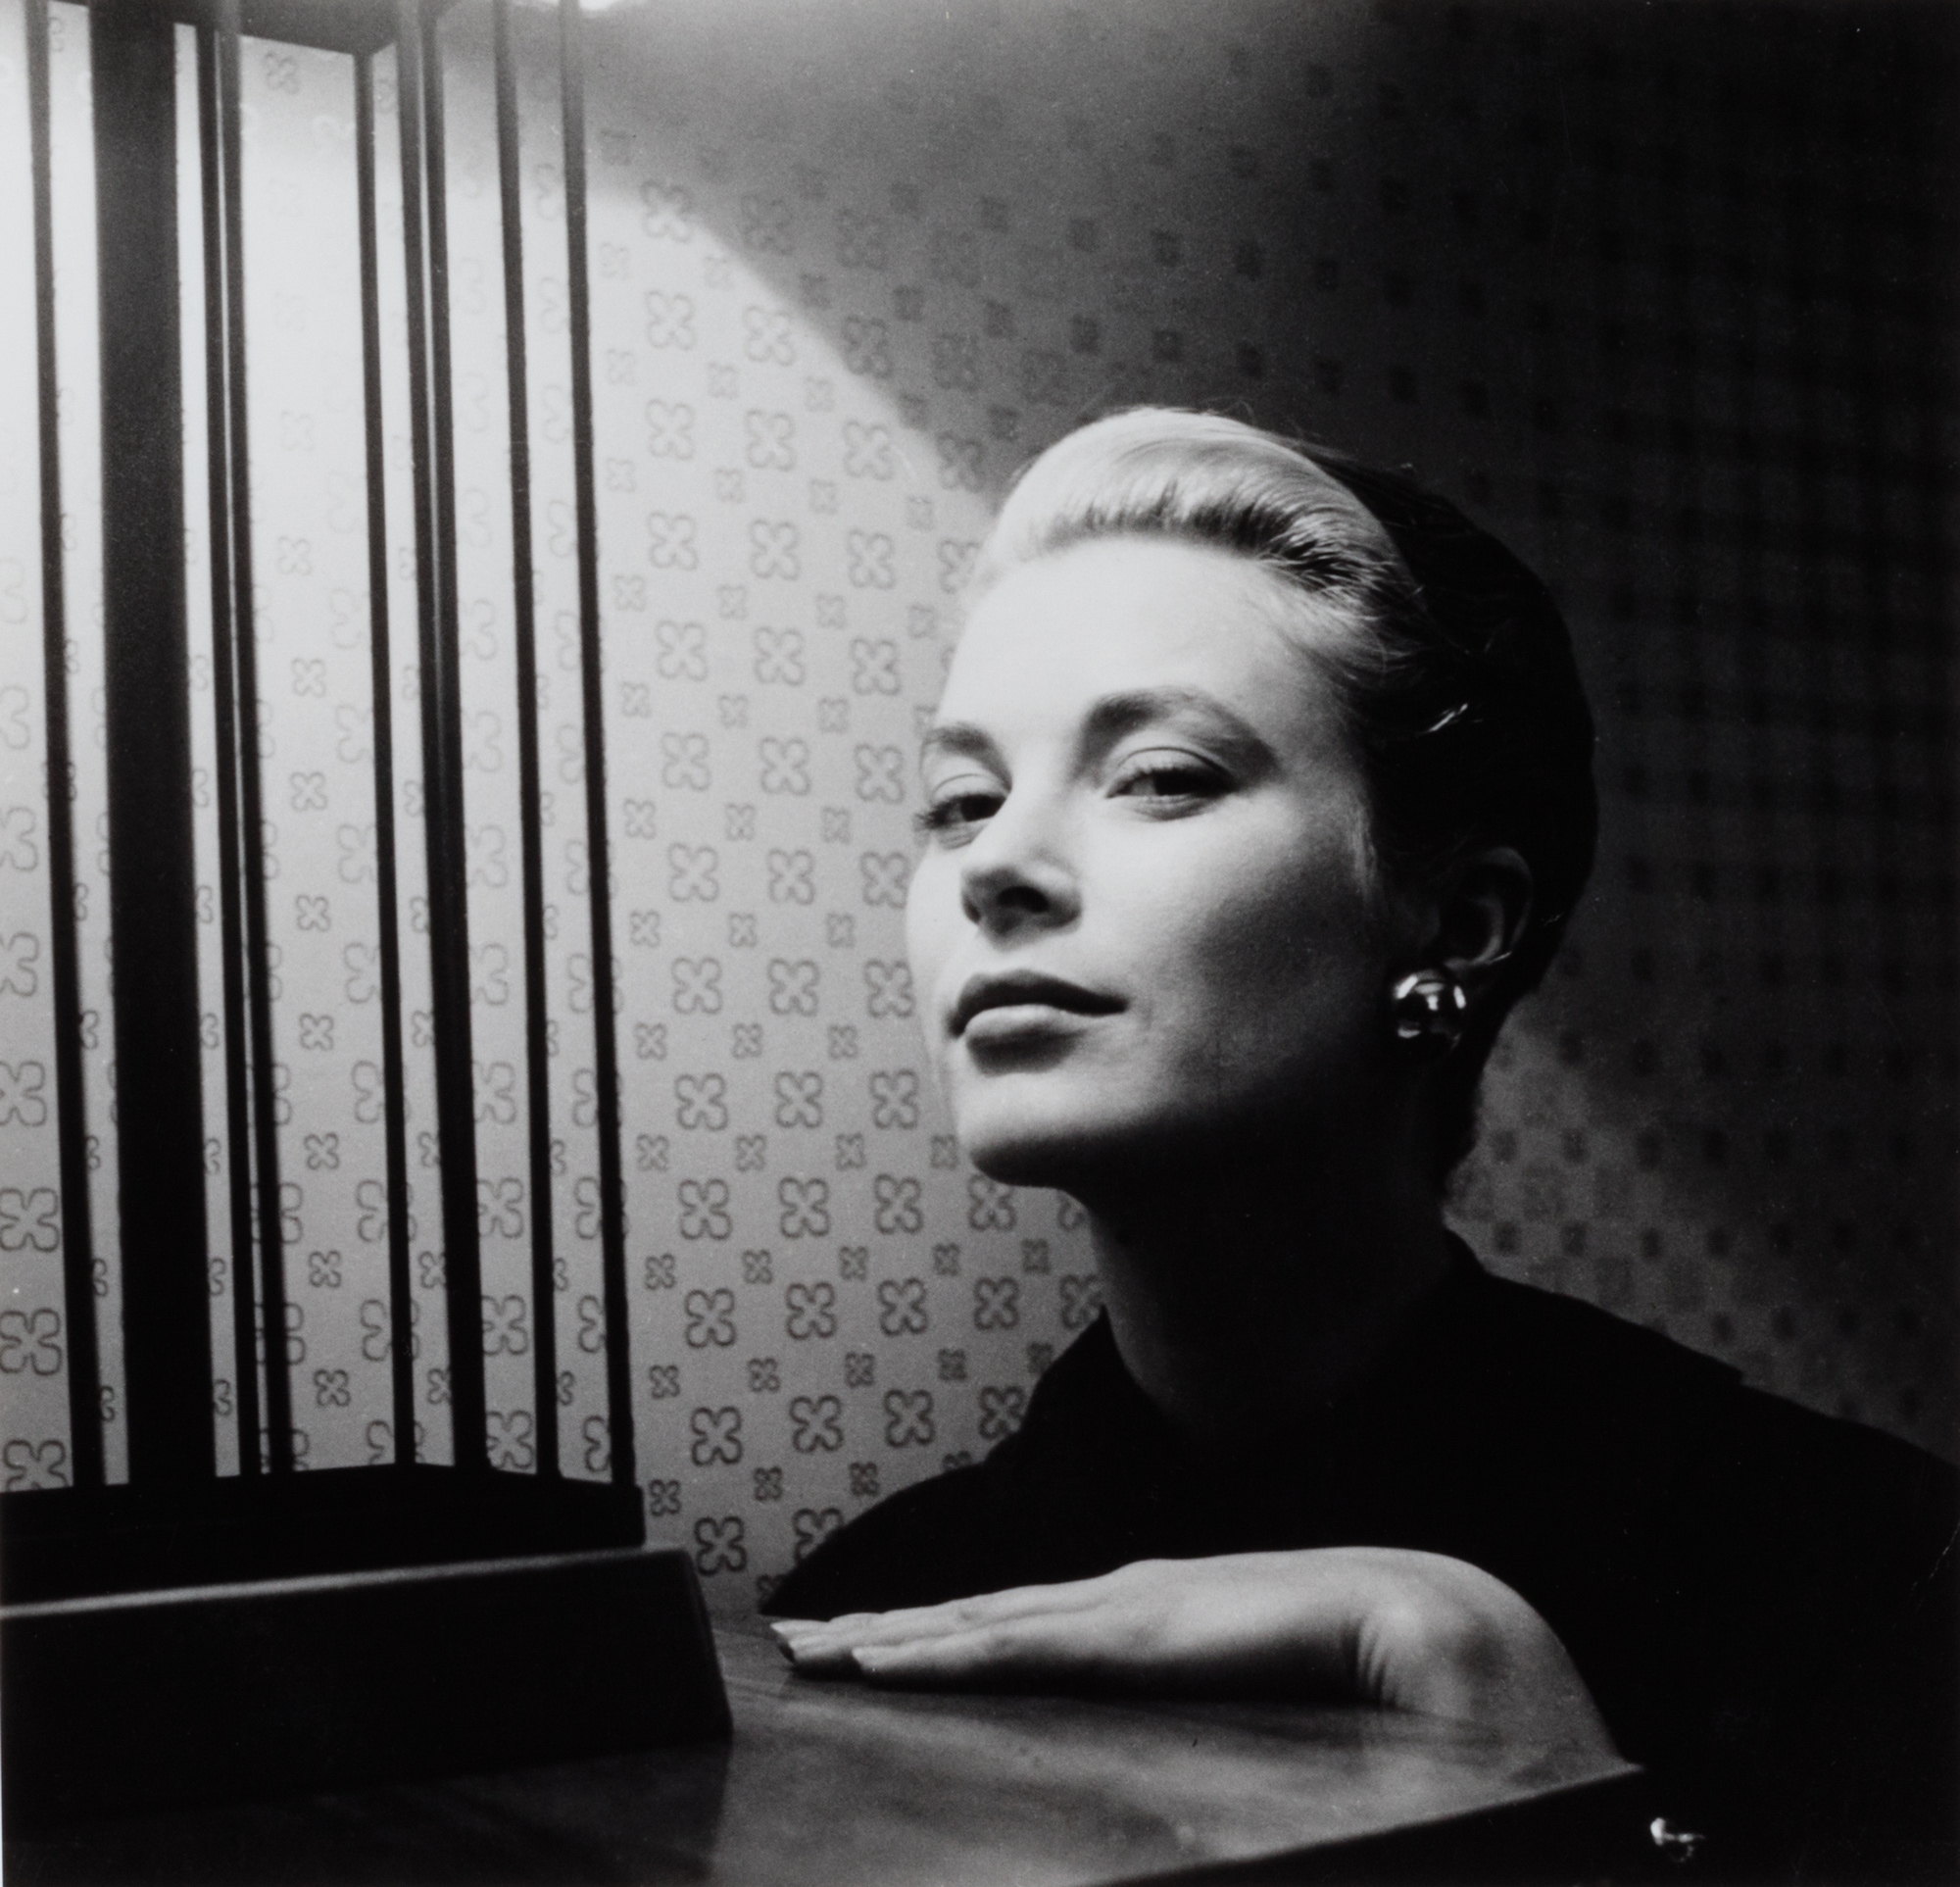 Artwork by Cecil Beaton, Grace Kelly, Made of Vintage gelatin silver print